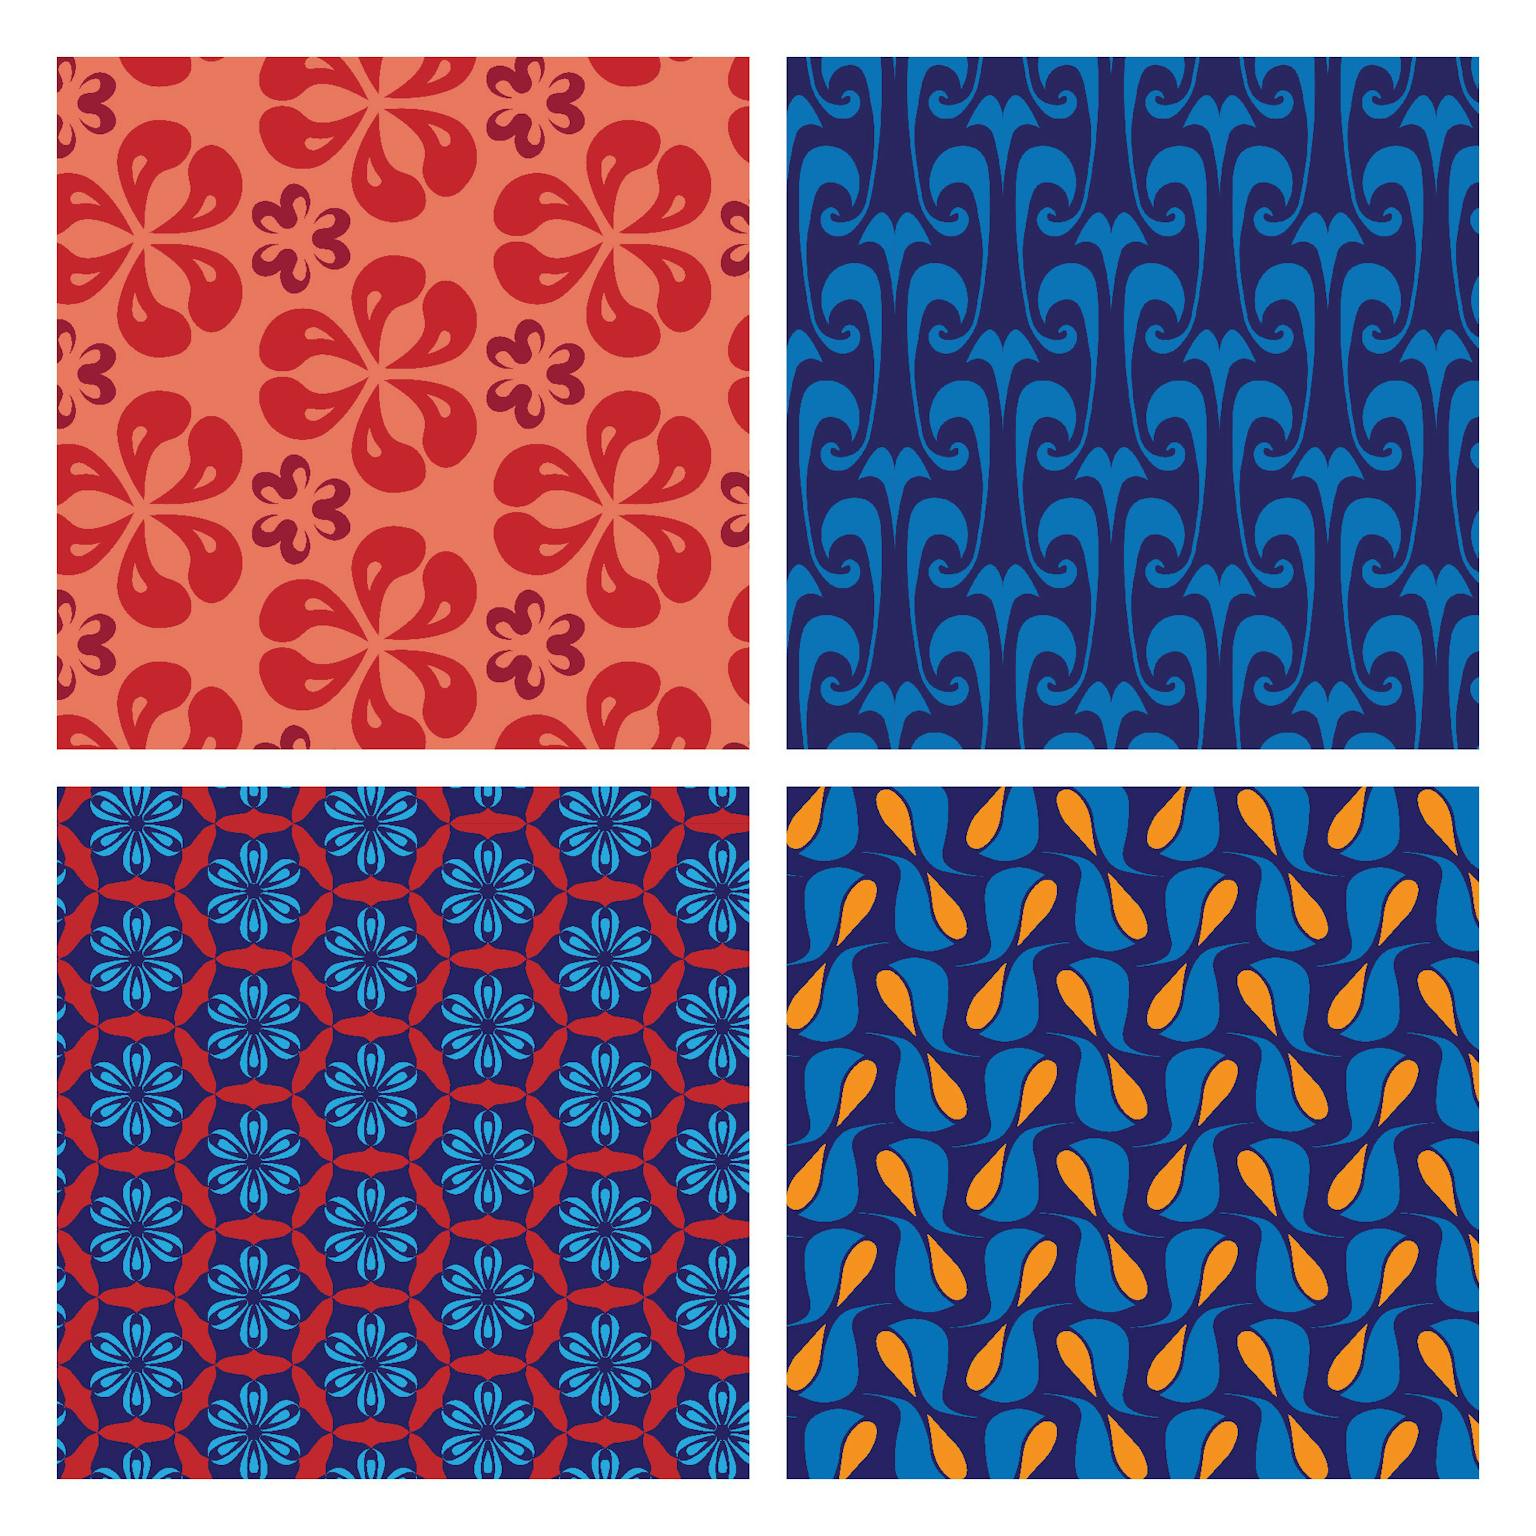 Image for entry 'Blue and Red Wallpaper Groups'